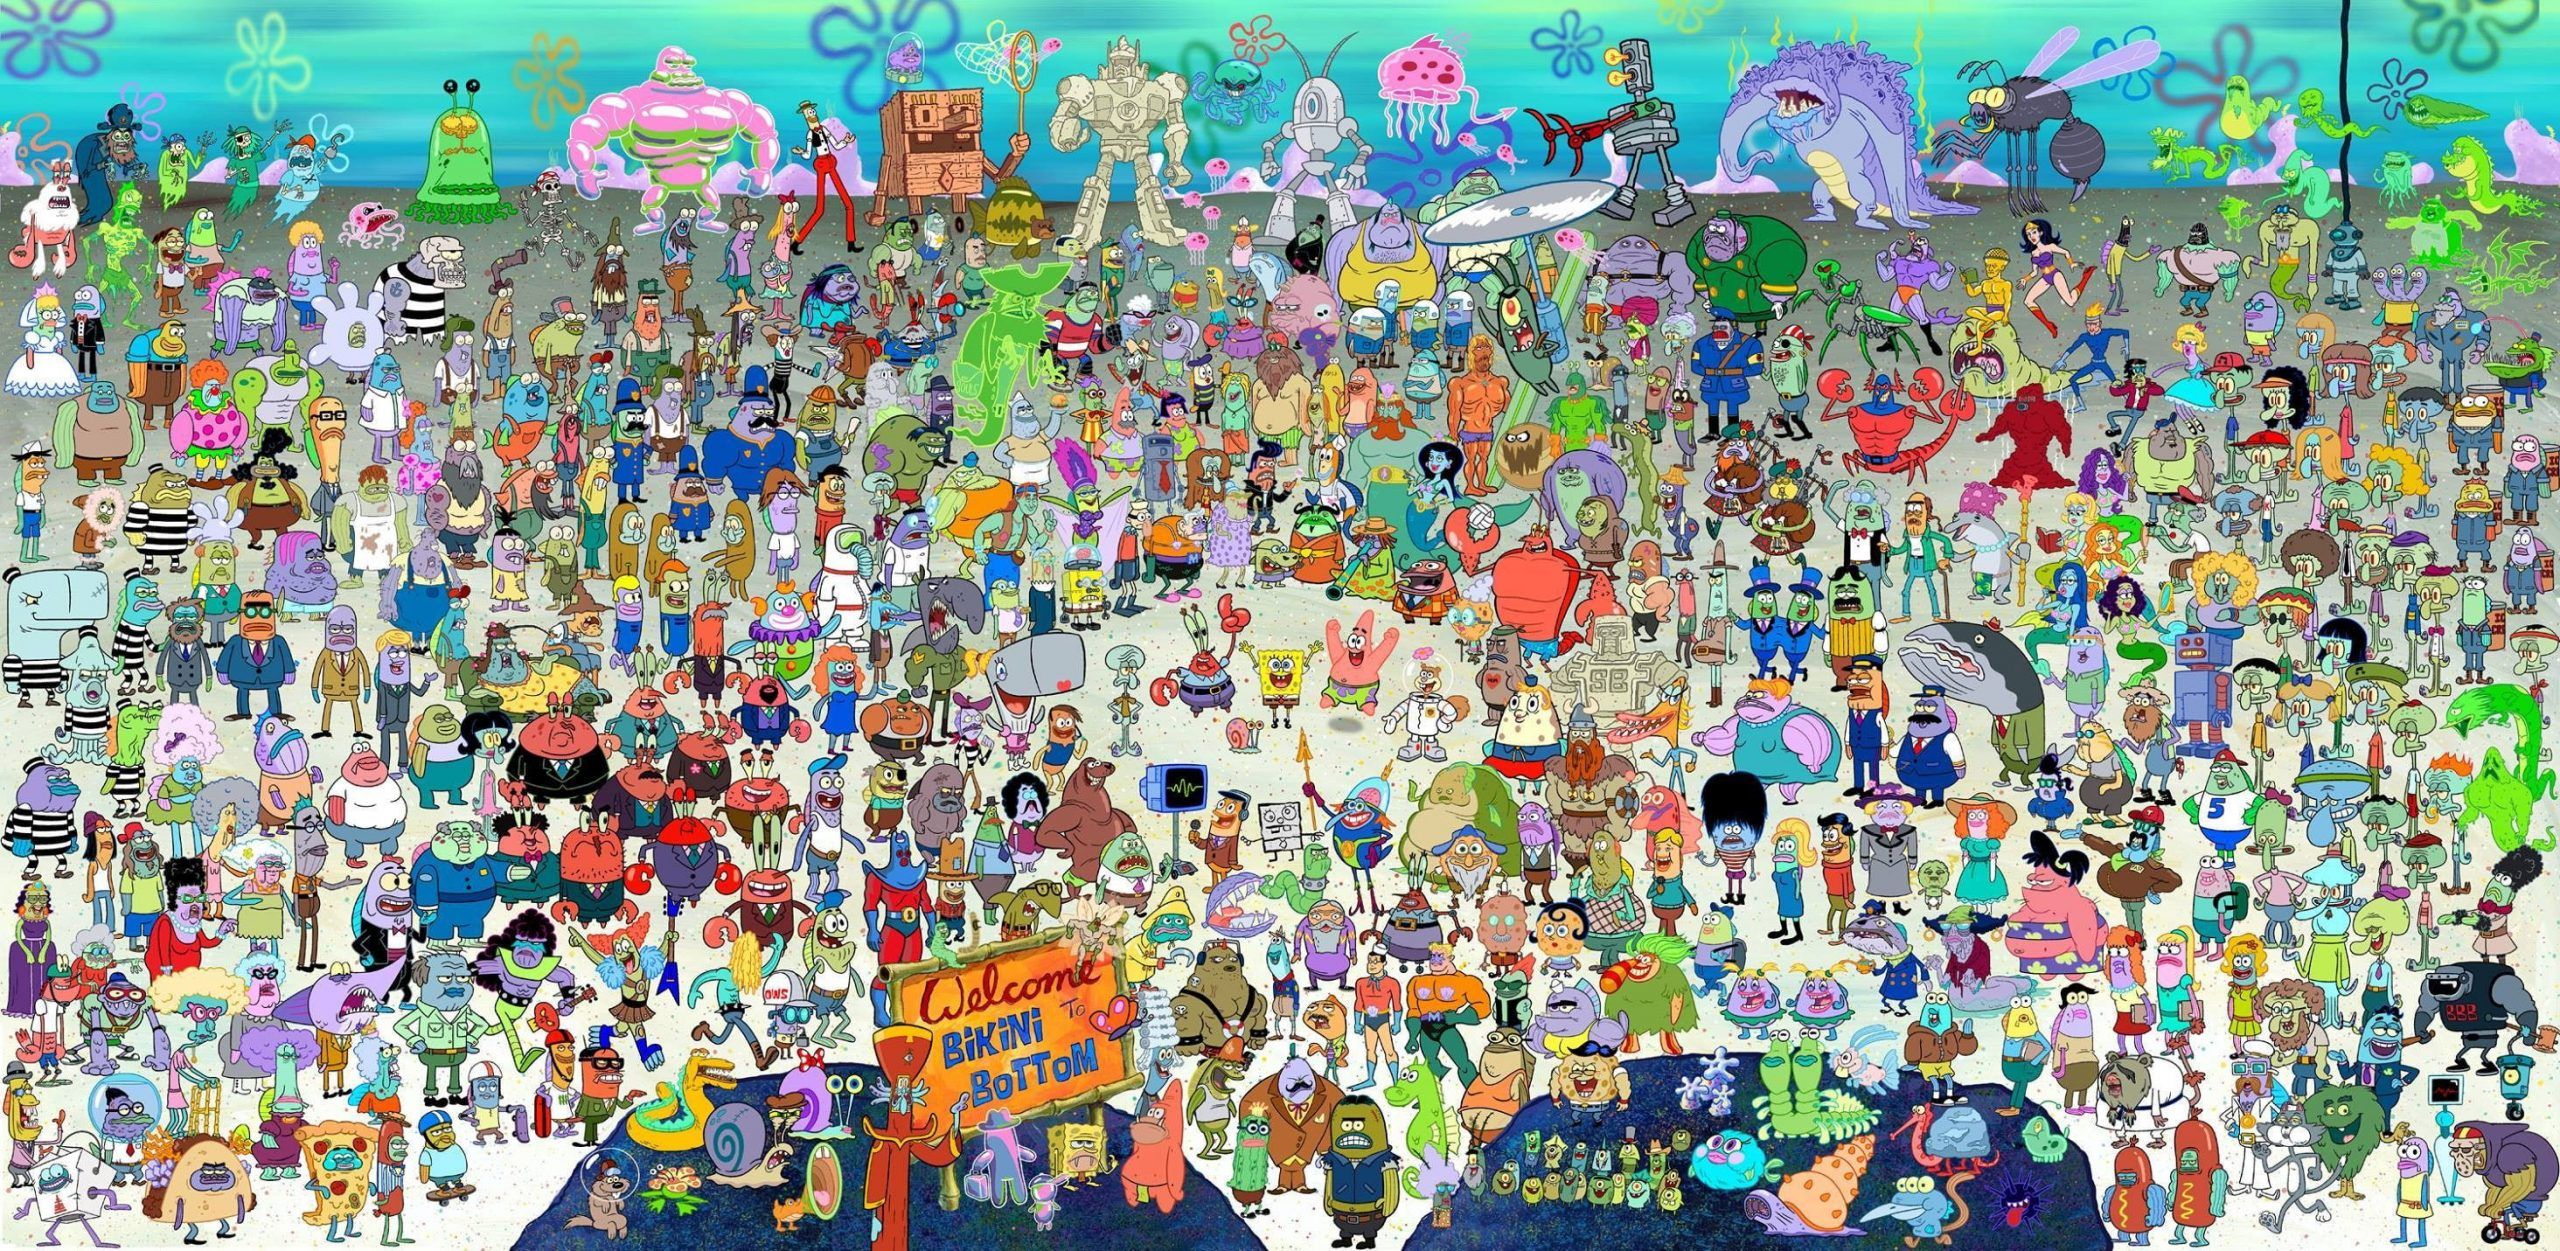 A large group of cartoon characters from various shows, including Spongebob Squarepants, gather together in a crowded beach scene. - SpongeBob